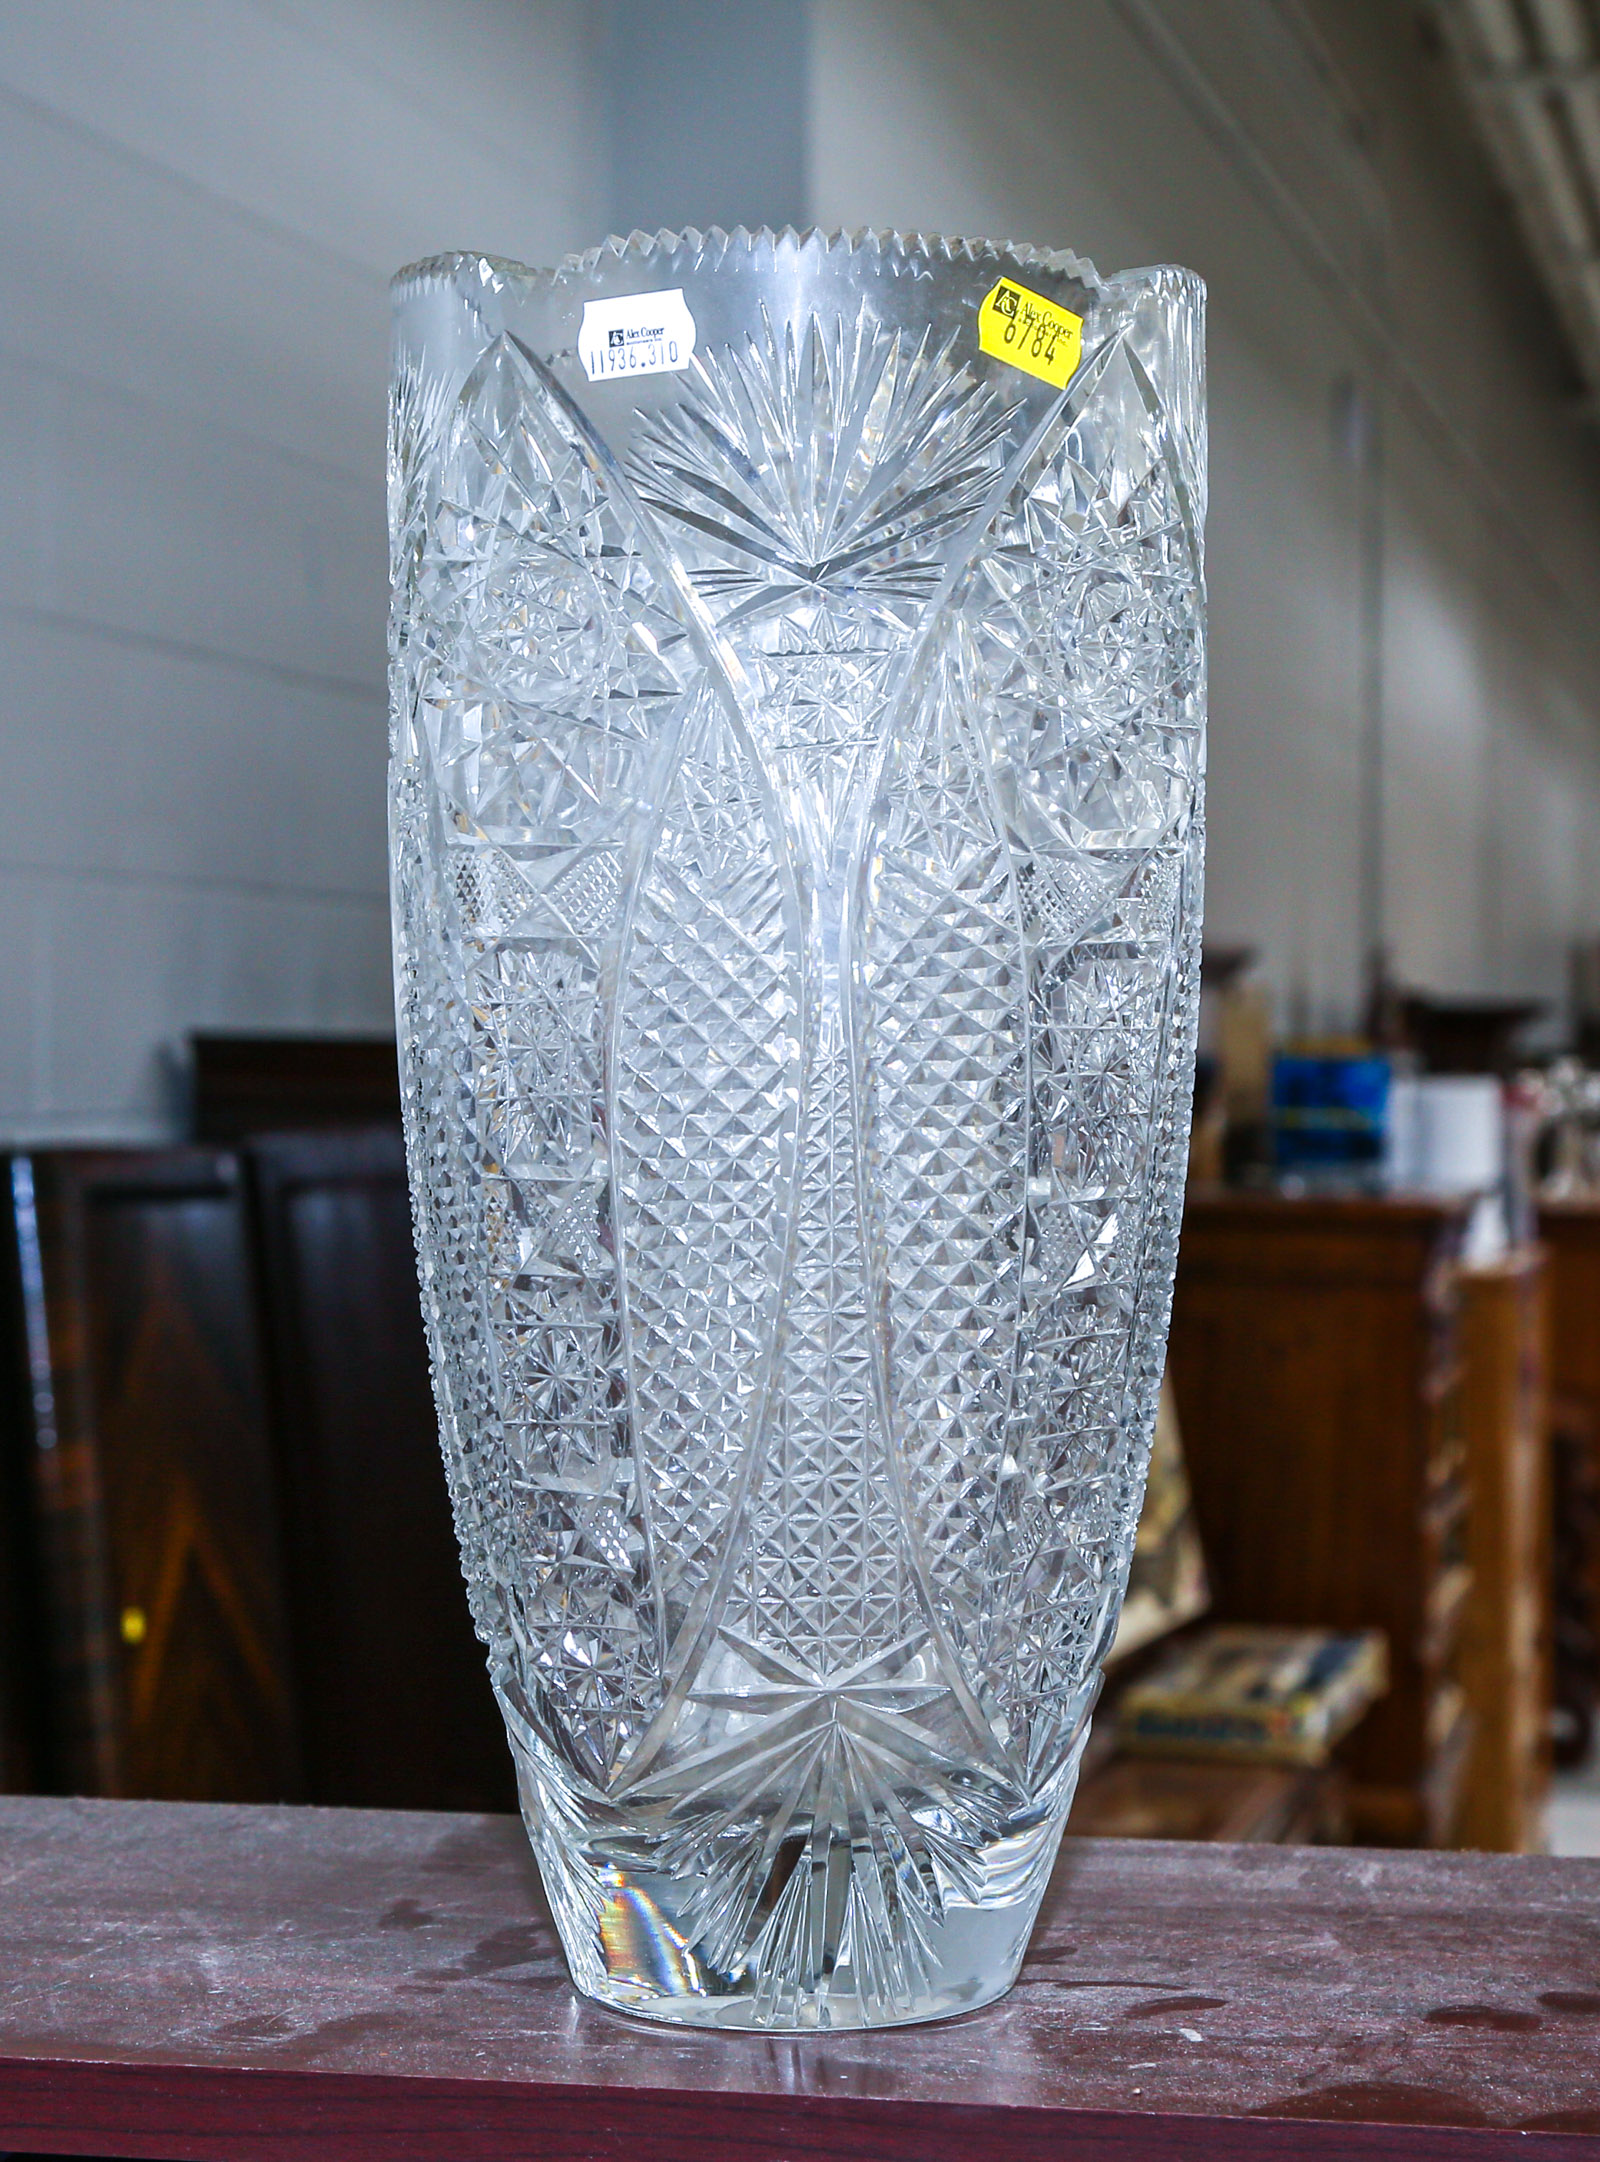 LARGE HAWKES CUT GLASS VASE 2nd